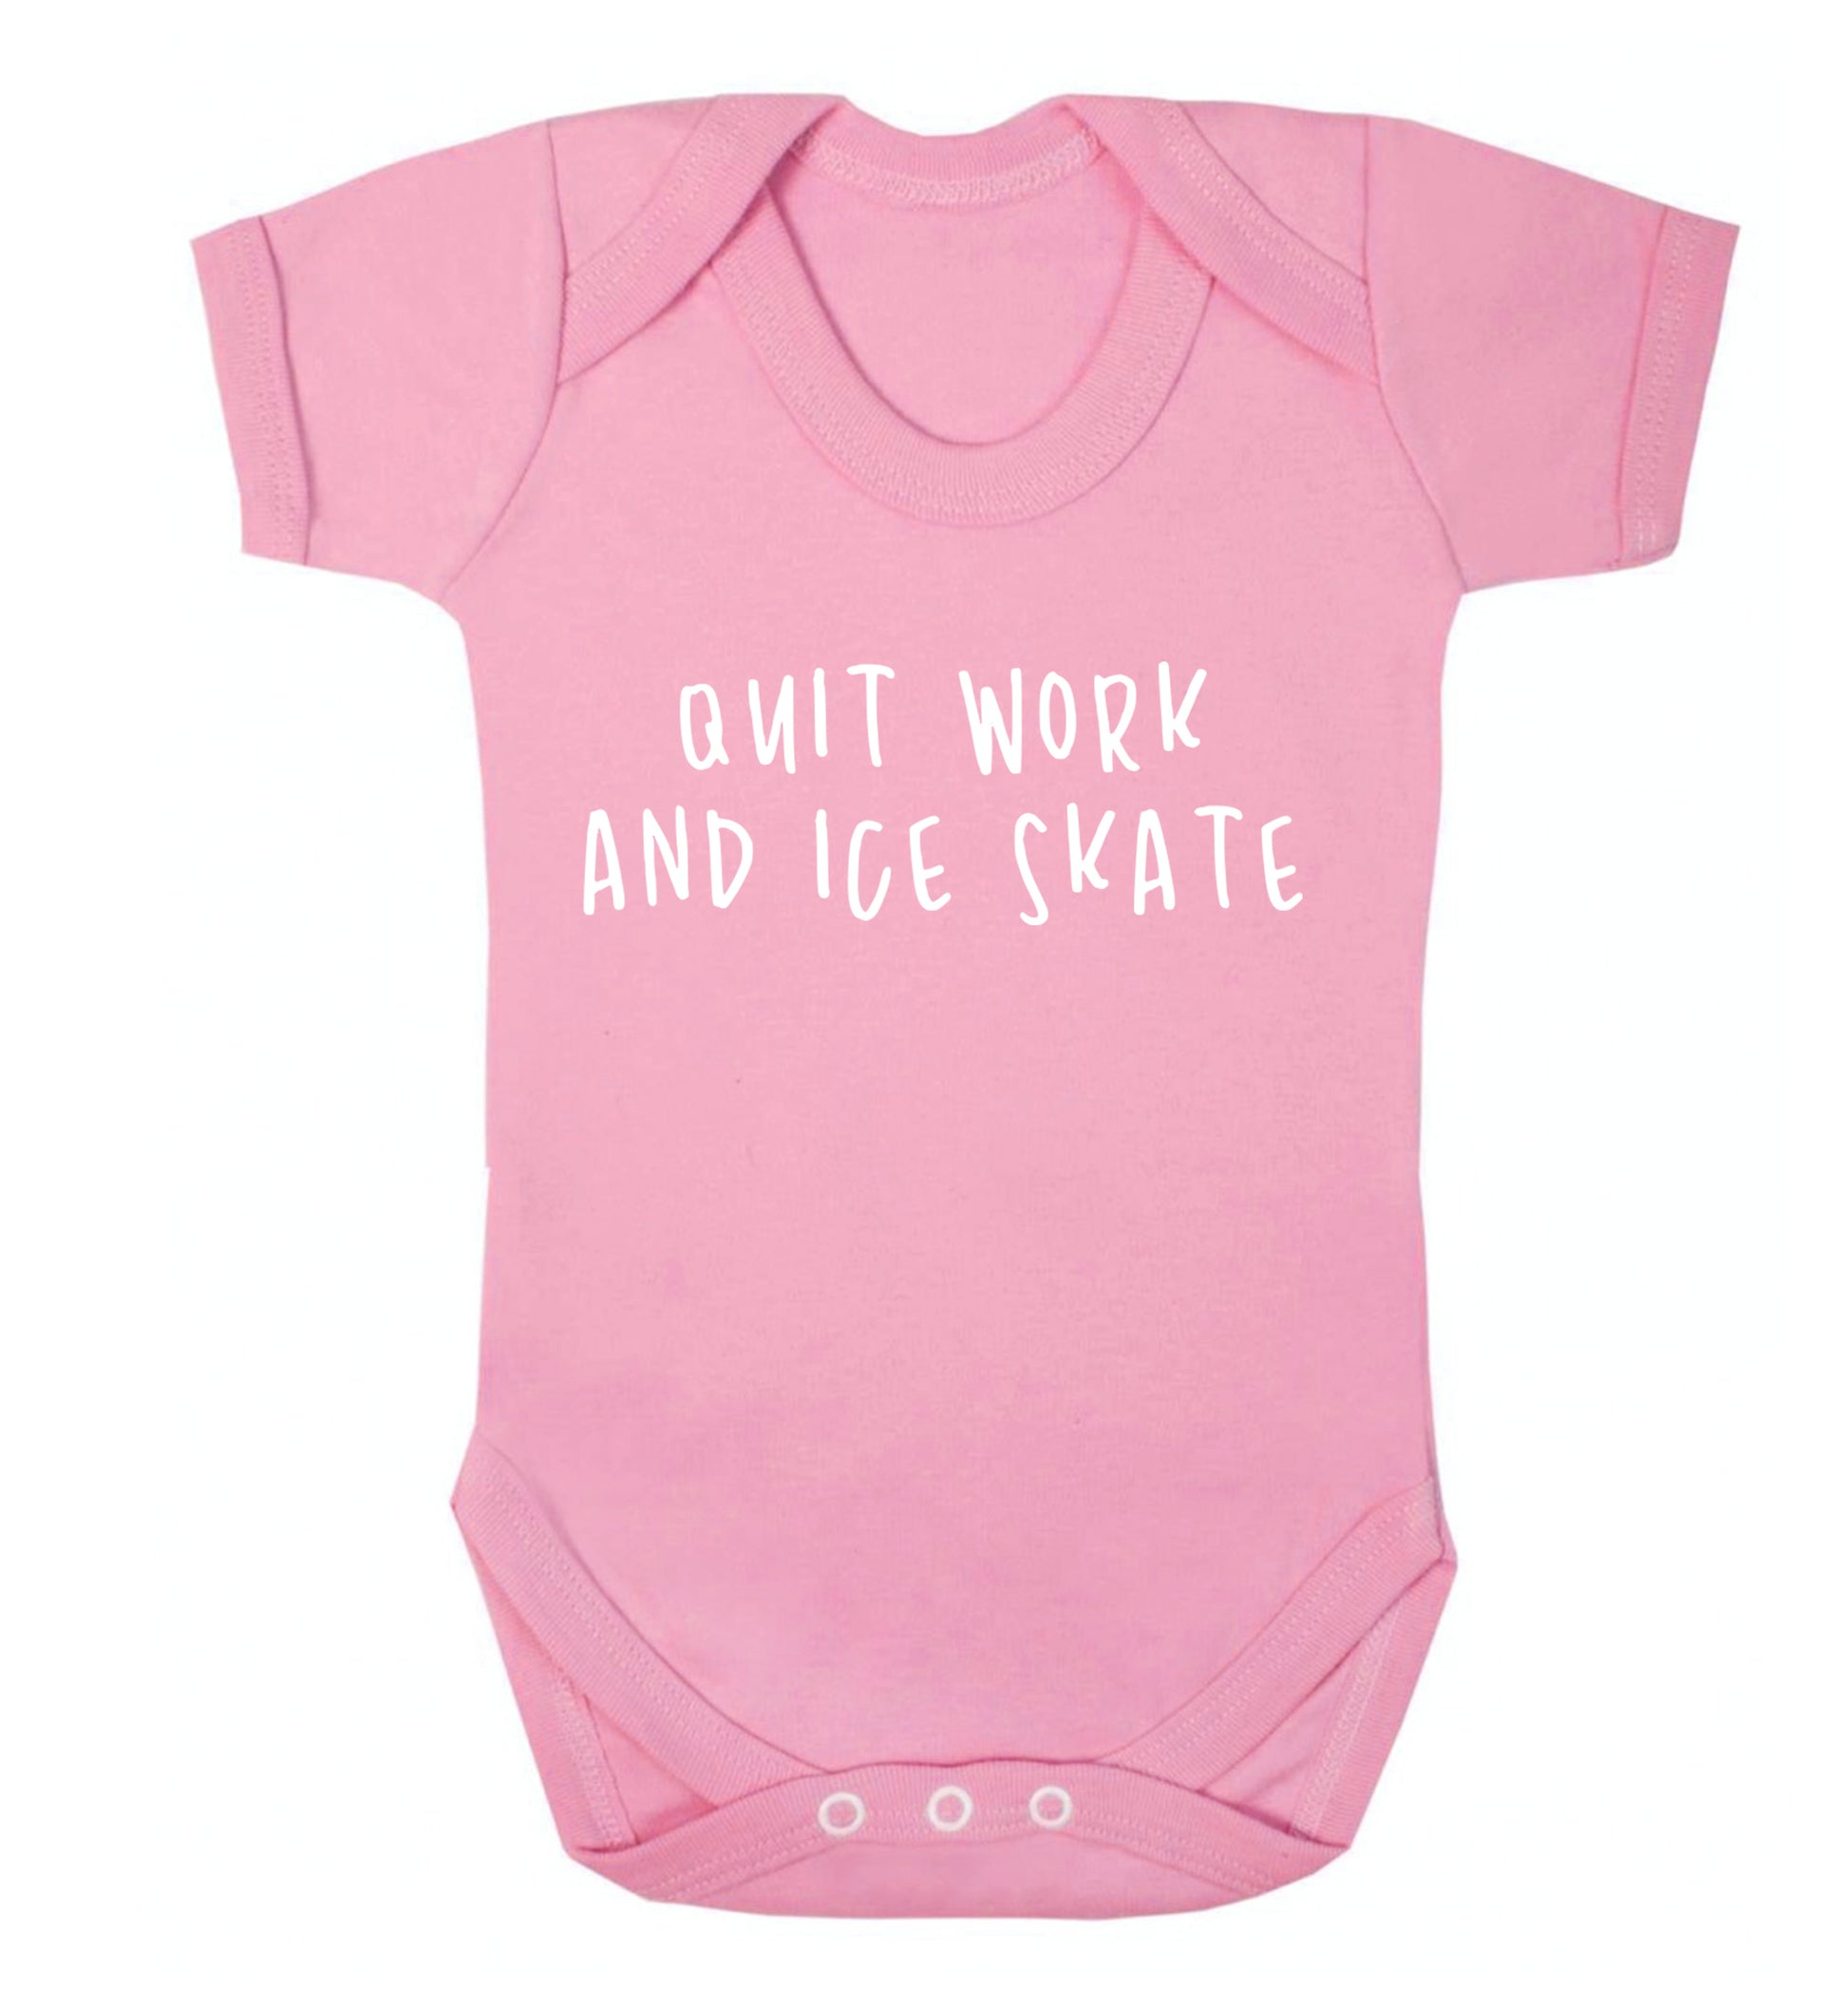 Quit work ice skate Baby Vest pale pink 18-24 months